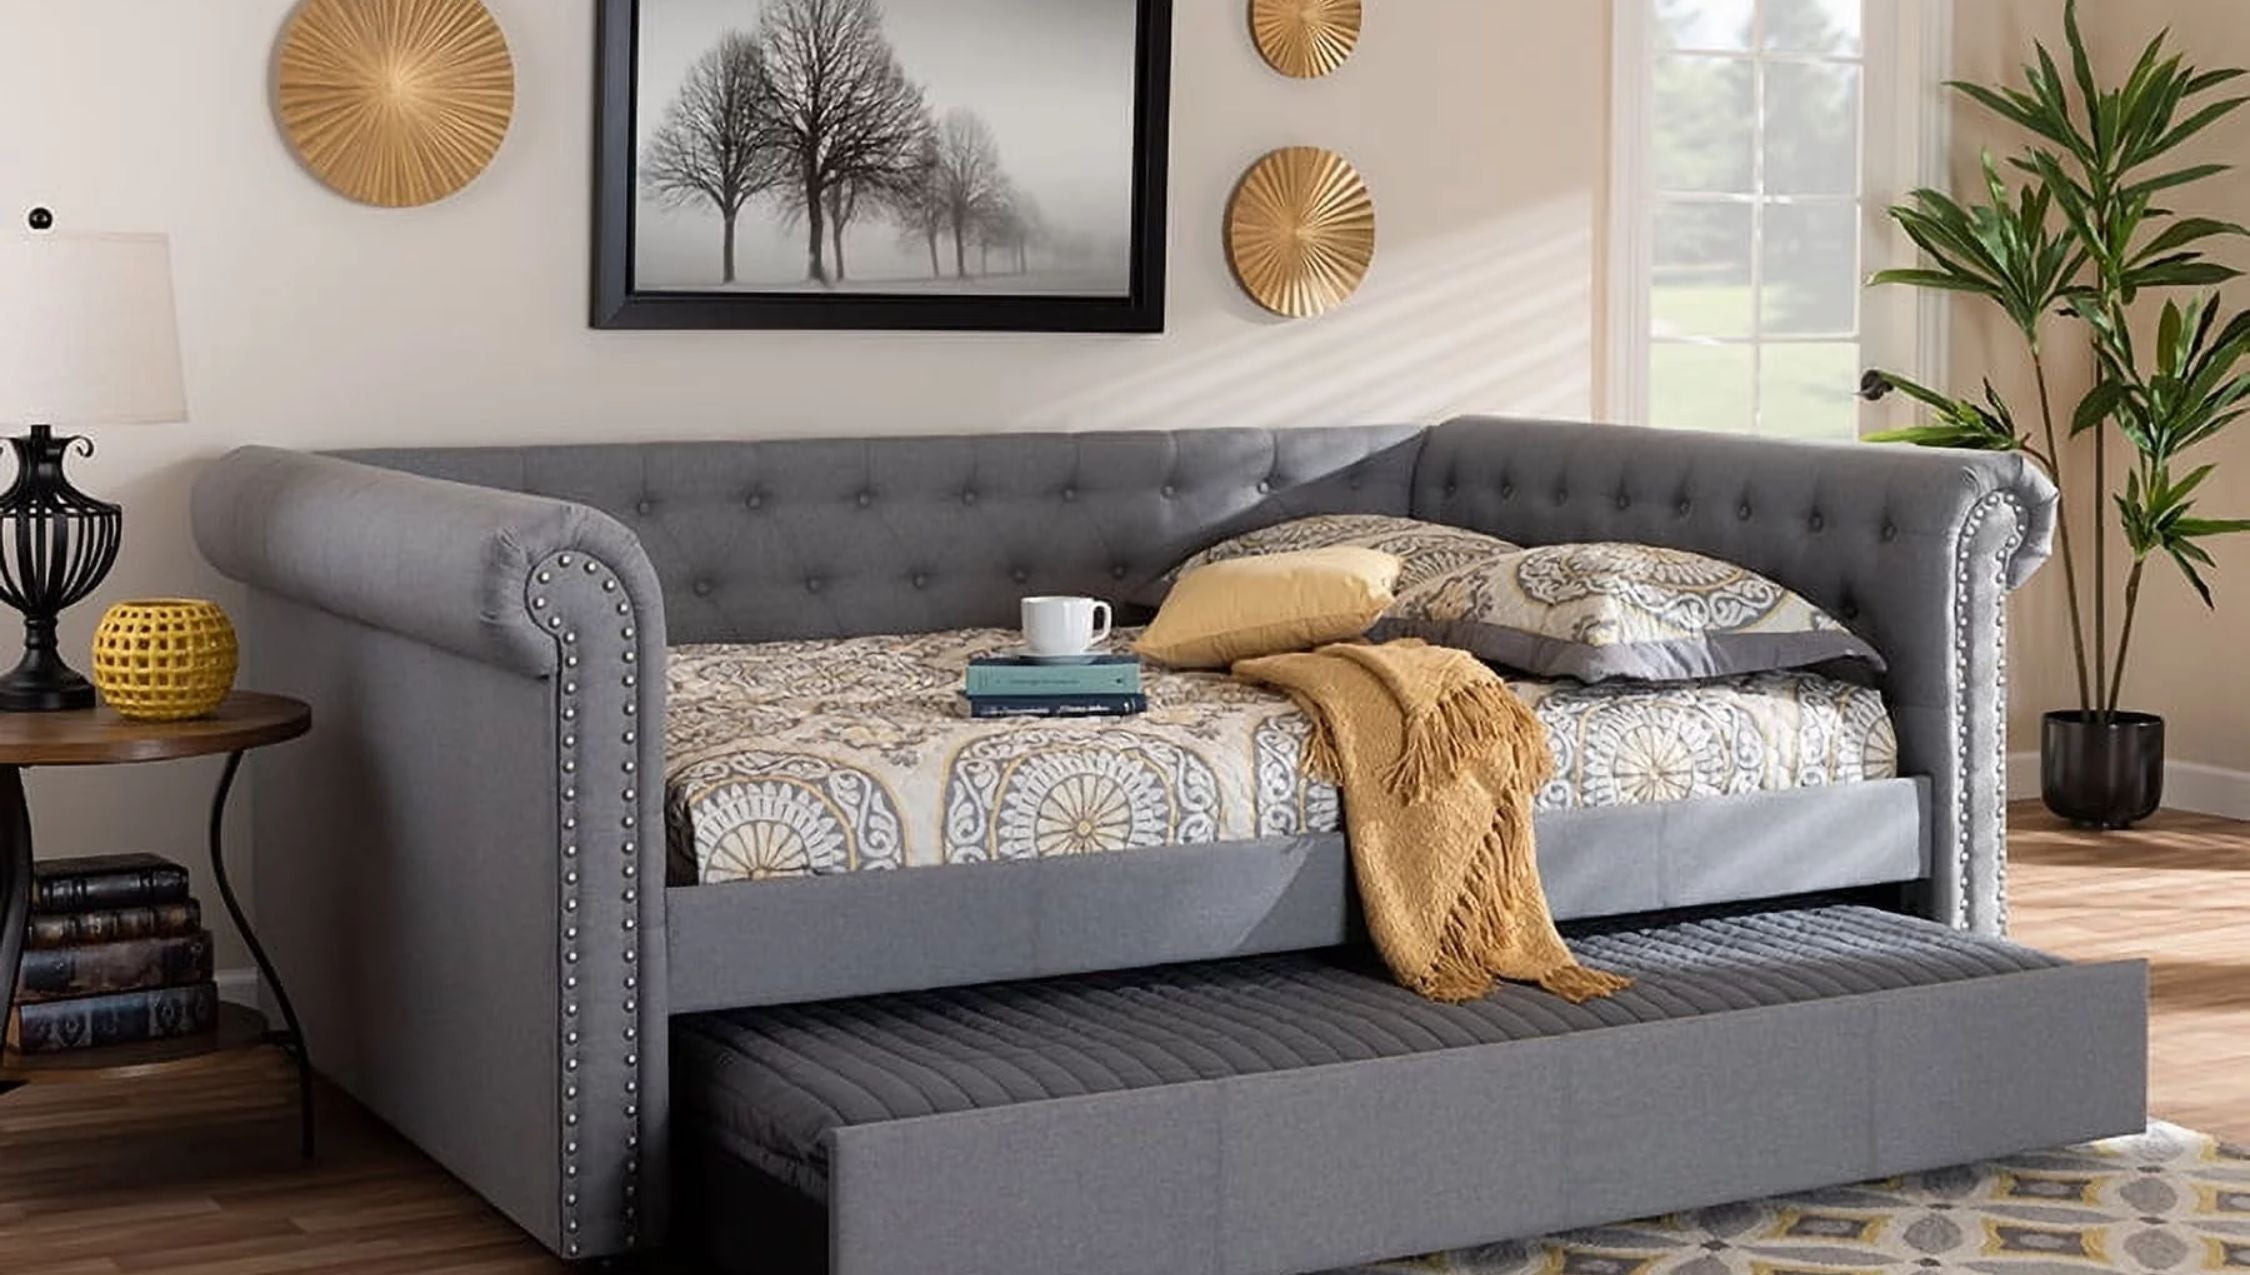 Queen Size Daybeds